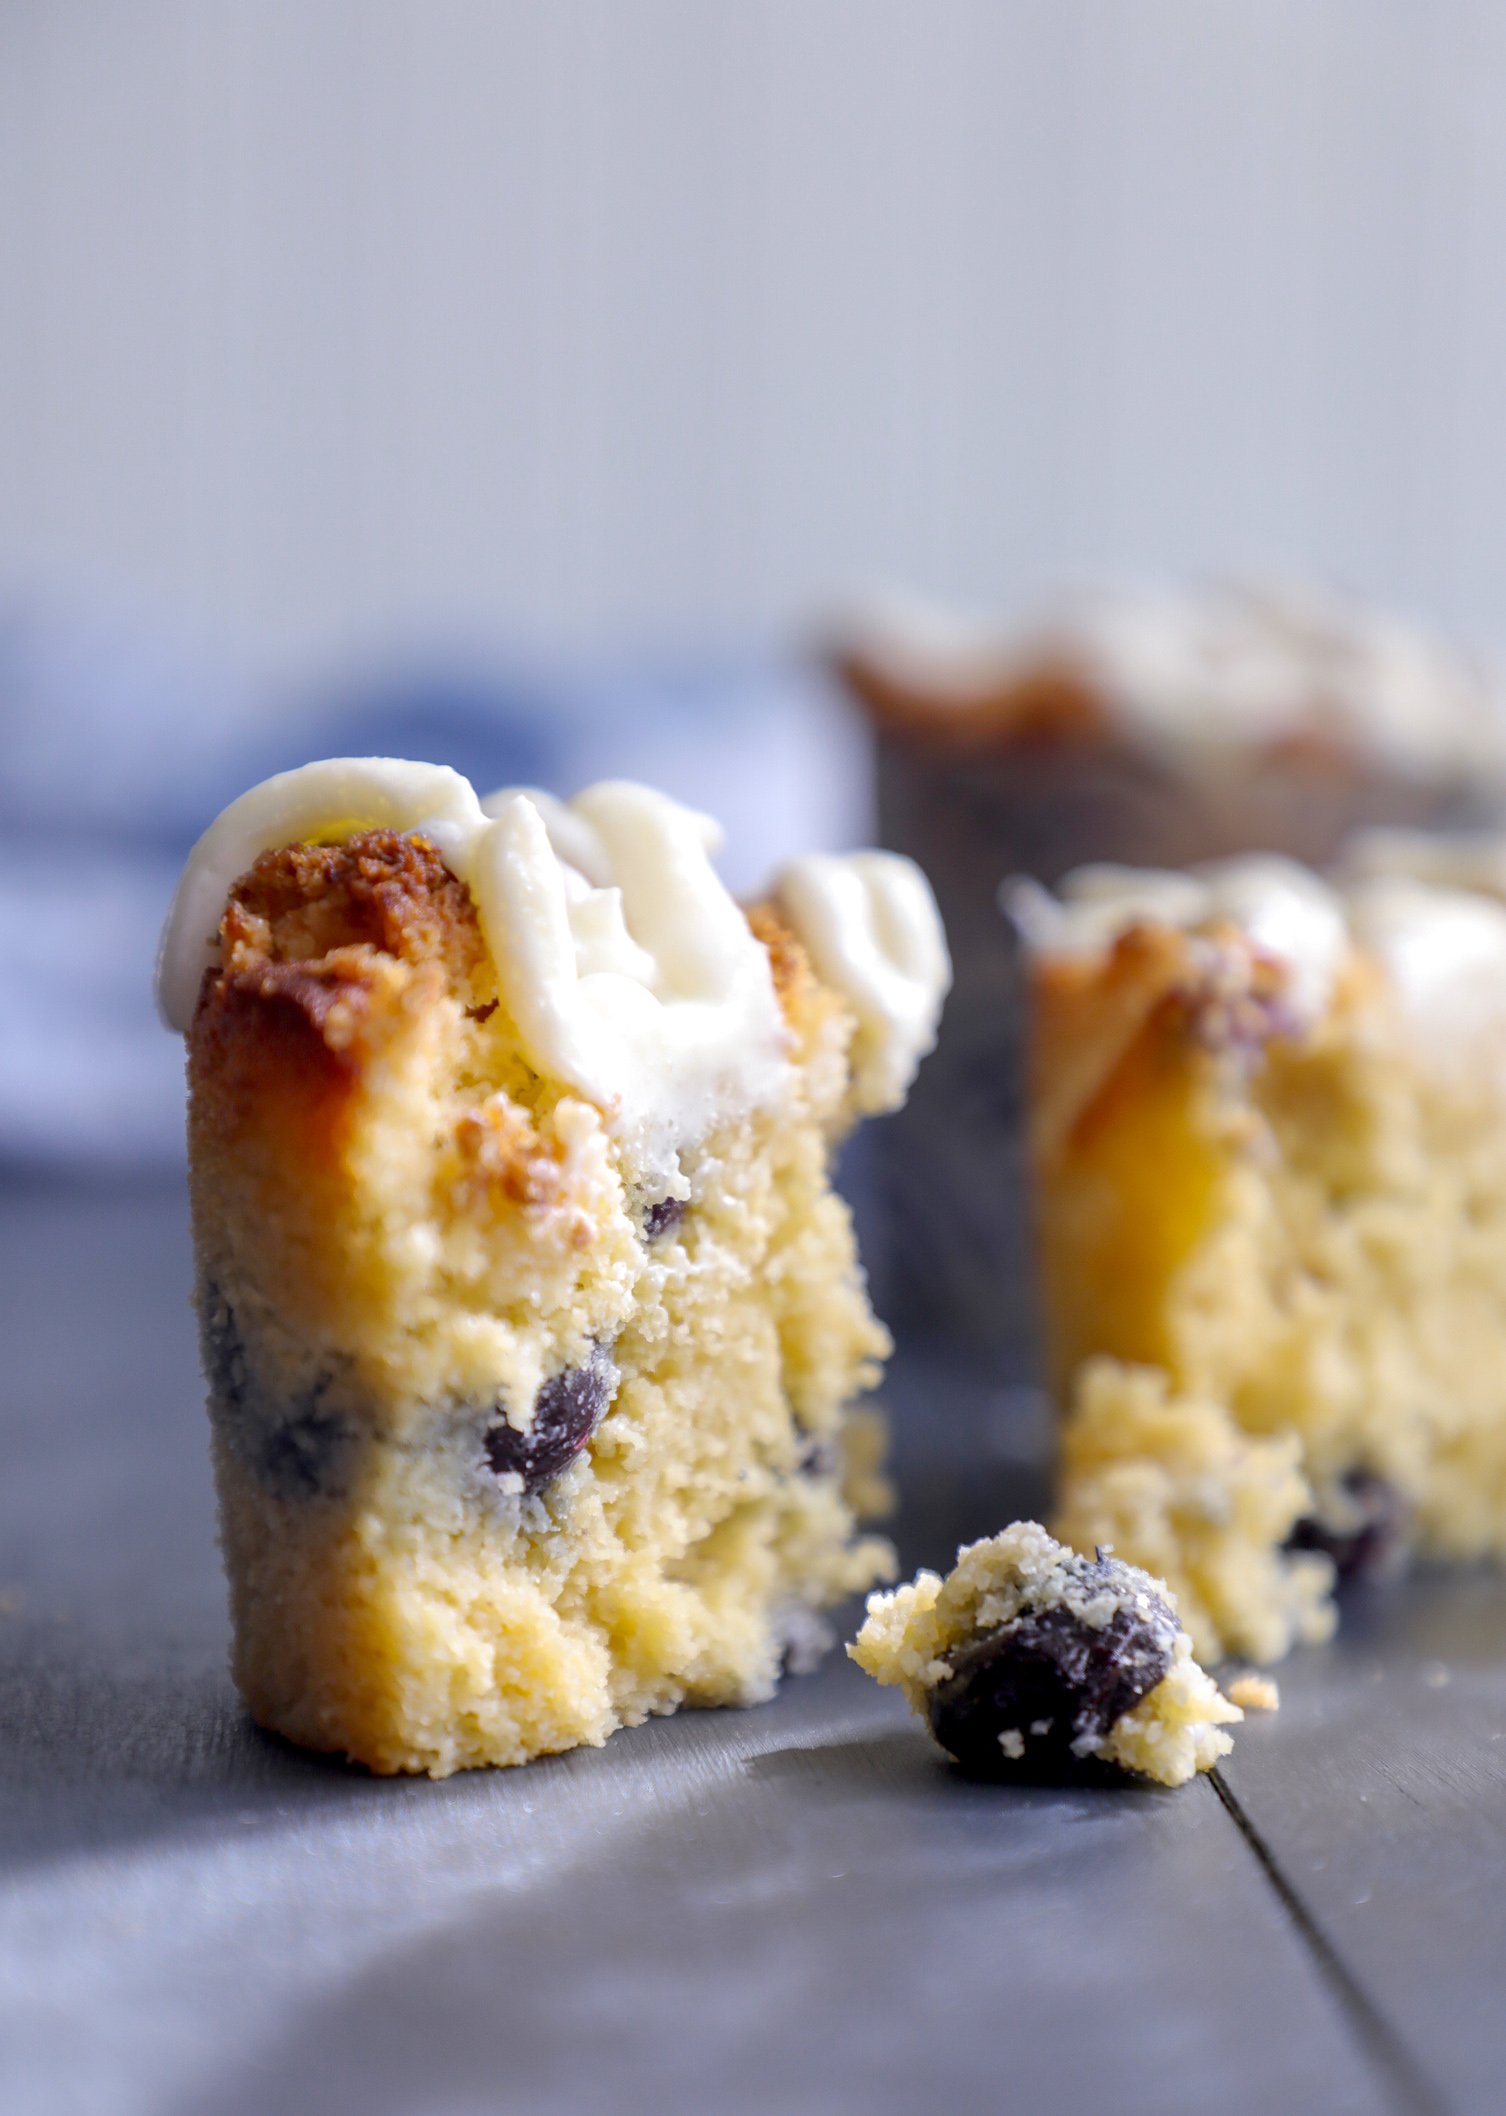 Keto Blueberry Muffins cross section with dripping lemon glaze